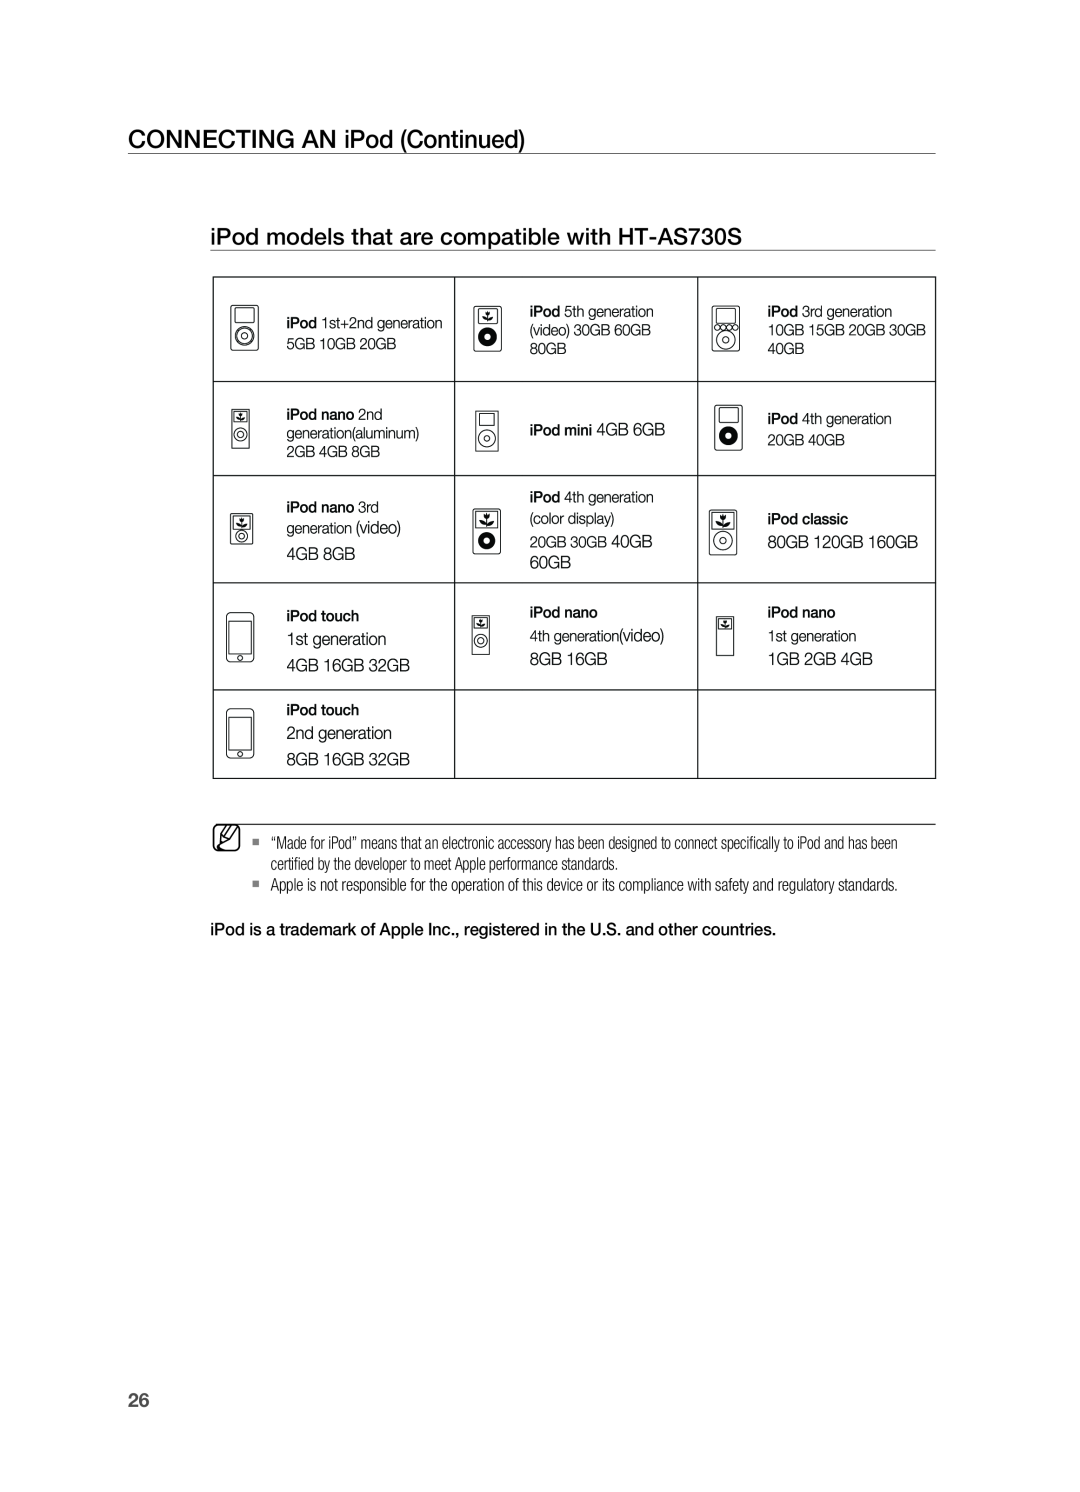 Samsung HT-AS730ST user manual Connecting an iPod Continued, iPod models that are compatible with HT-AS730S 